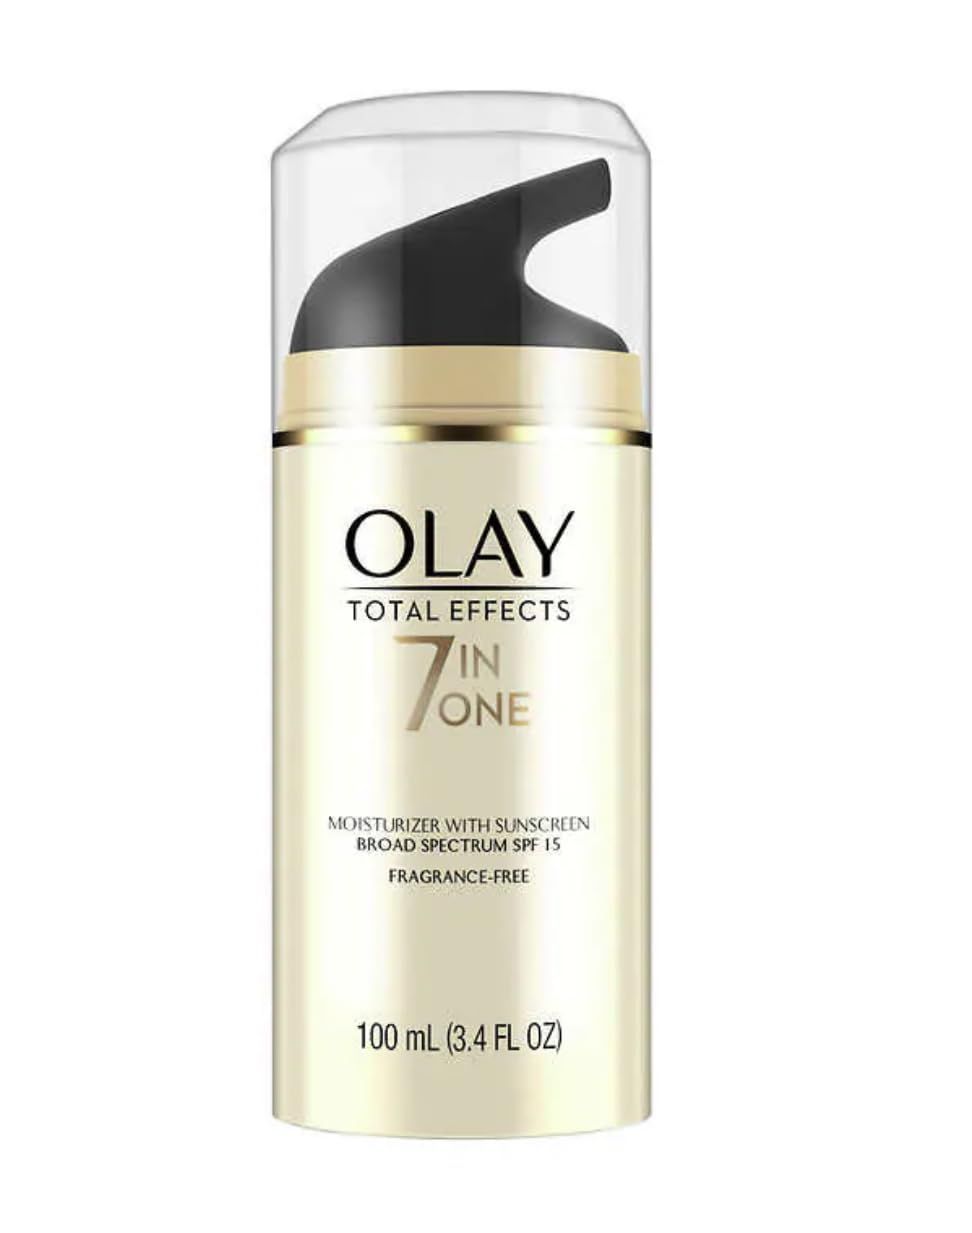 OLAY TOTAL EFFECTS 7 IN 1 MOISTURIZER WITH SUNSCREEN SPF 15 100 ML